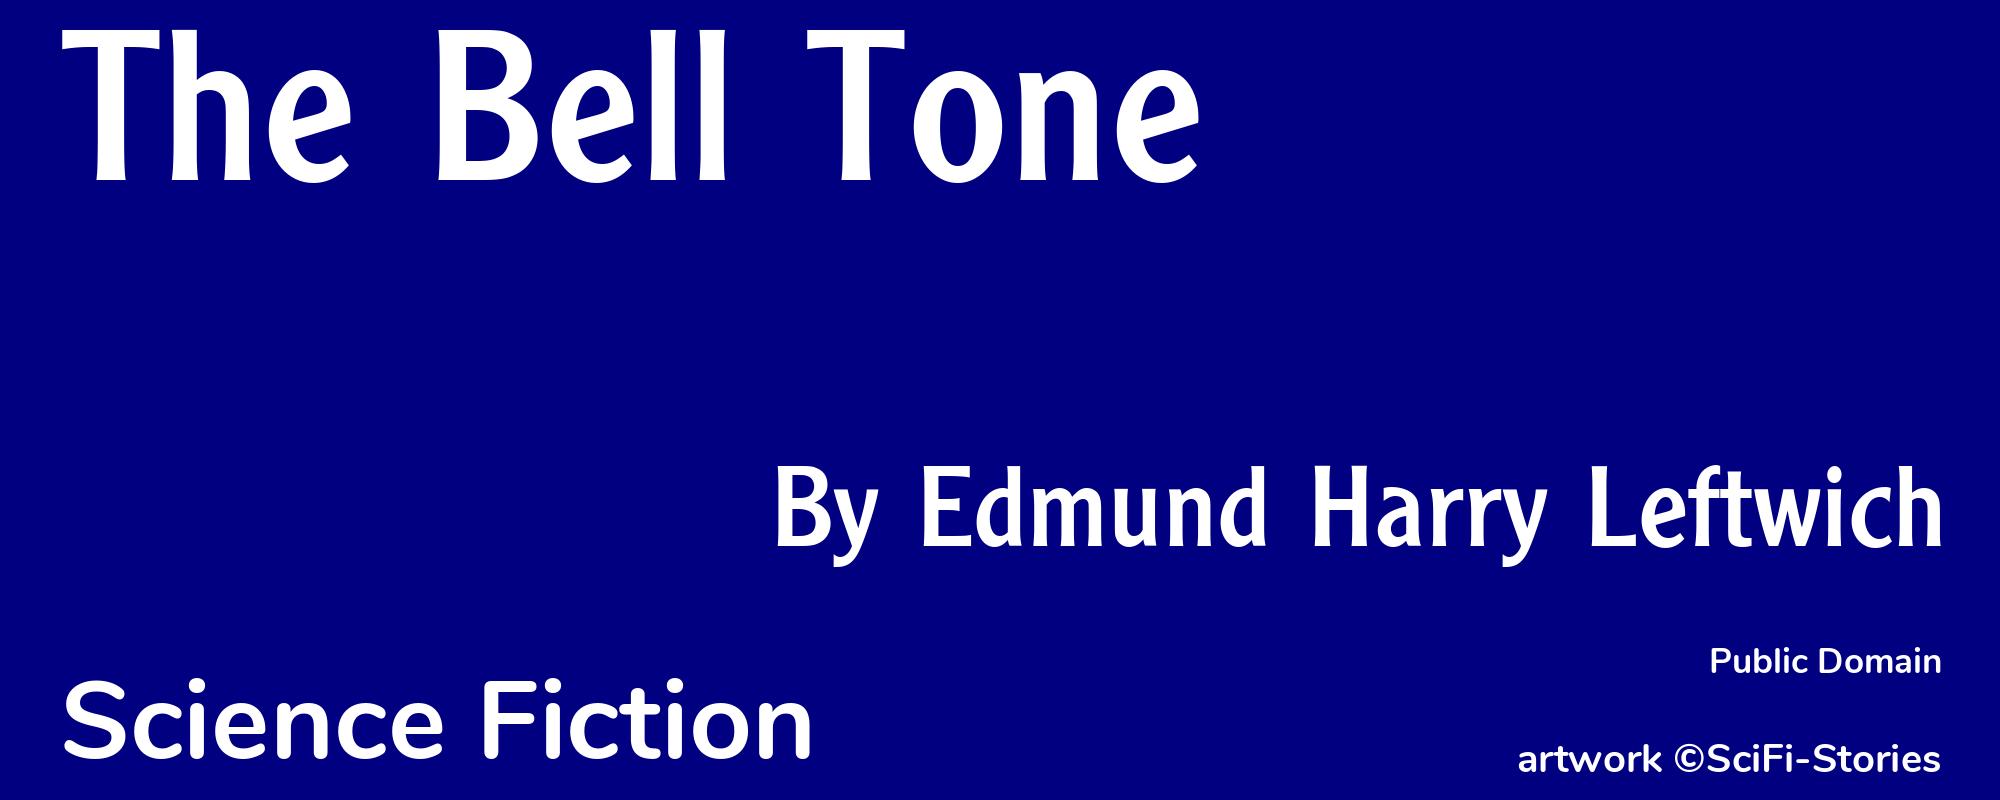 The Bell Tone - Cover